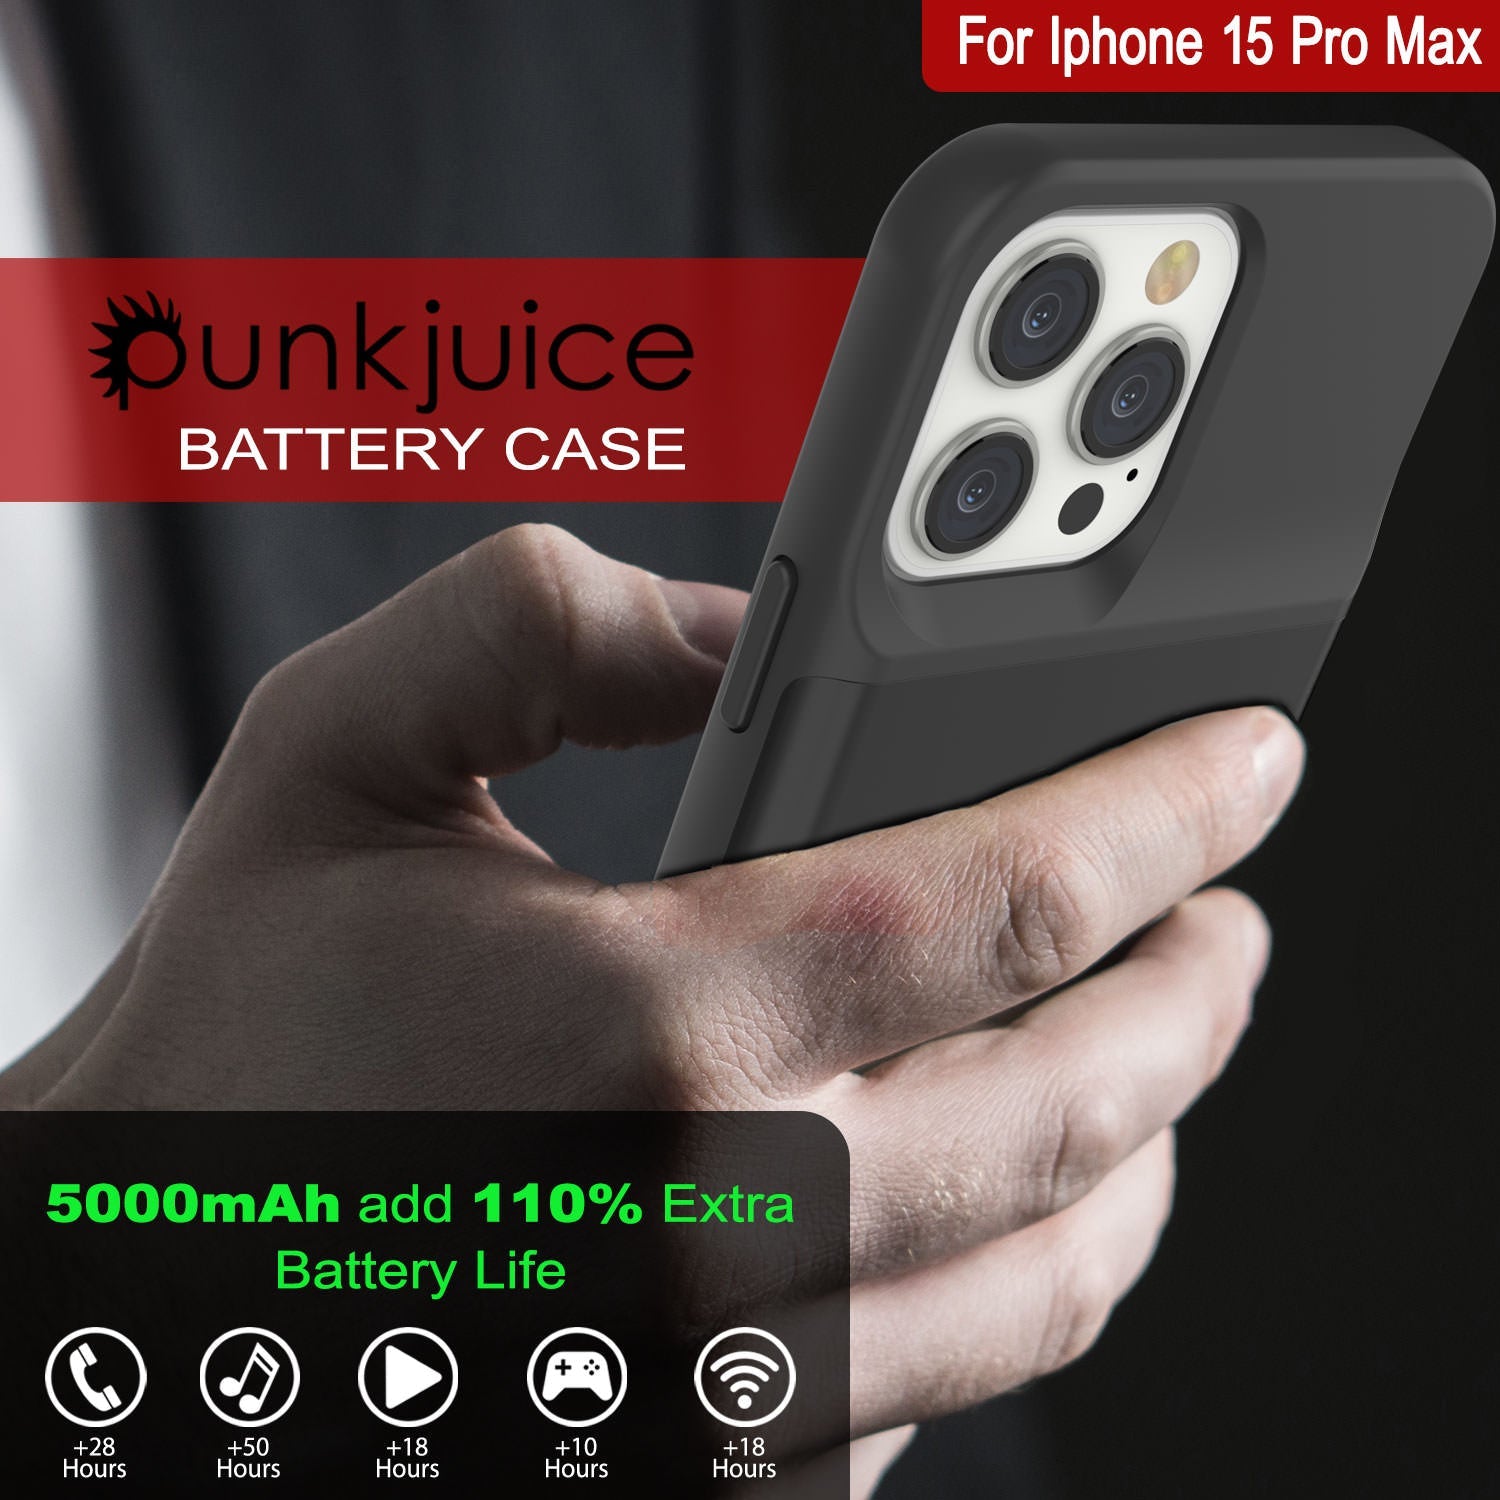 iPhone 15 Pro Max Battery Case, PunkJuice 5000mAH Fast Charging Power Bank W/ Screen Protector | [Black]